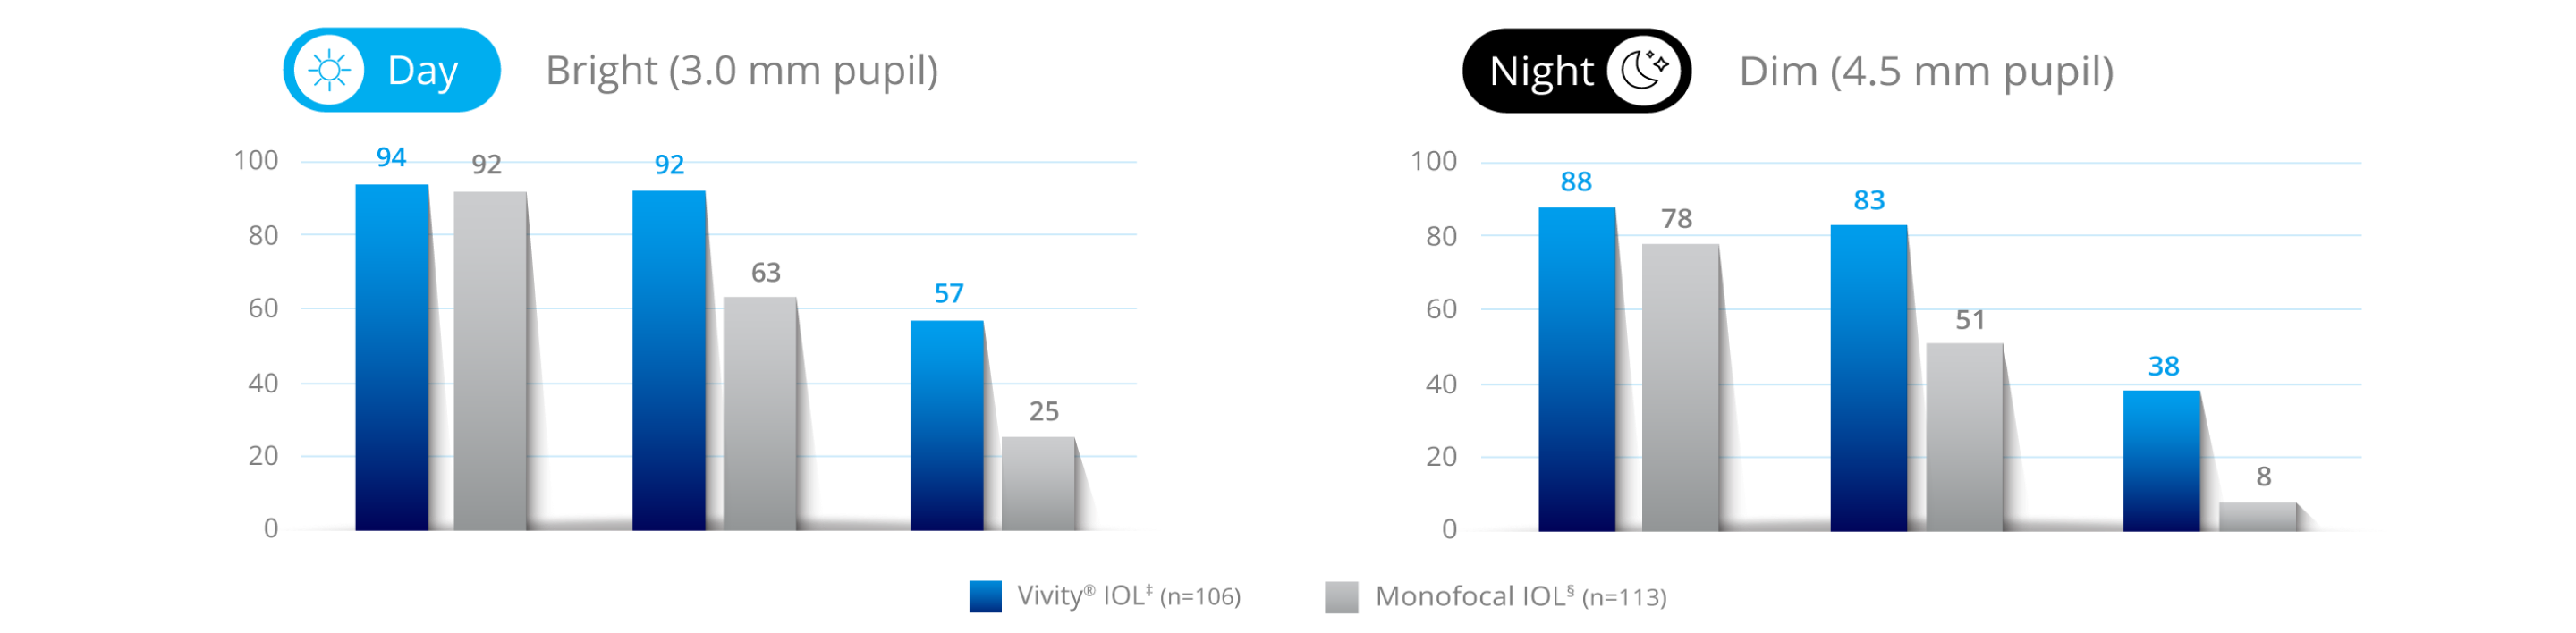 Bar graph showing the percent of patients reporting good or very good vision at 6 months without spectacles in bright light, where the best outcome would be 100%.  106 patients were implanted with Vivity IOL, and 113 patients were implanted with a monofocal IOL.  The graph displays that with the Vivity IOL, 94% of patients at far, 92% of patients at arm’s length, and 57% of patients up-close reported good or very good vision. With the monofocal IOL, 92% of patients at far away, 63% of patients at arm’s length and 25% of patients up close reported good or very good vision. Bar graph showing the percent of patients reporting good or very good vision at 6 months without spectacles in dim light, where the best outcome would be 100%.  106 patients were implanted with Vivity IOL, and 113 patients were implanted with a monofocal IOL.  The graph displays that with the Vivity IOL, 88% of patients at far, 83% of patients at arm’s length, and 38% of patients at up-close reported good or very good vision. With the monofocal IOL, 78% of patients at far away, 51% of patients at arm’s length and 8% of patients up close reported good or very good vision.